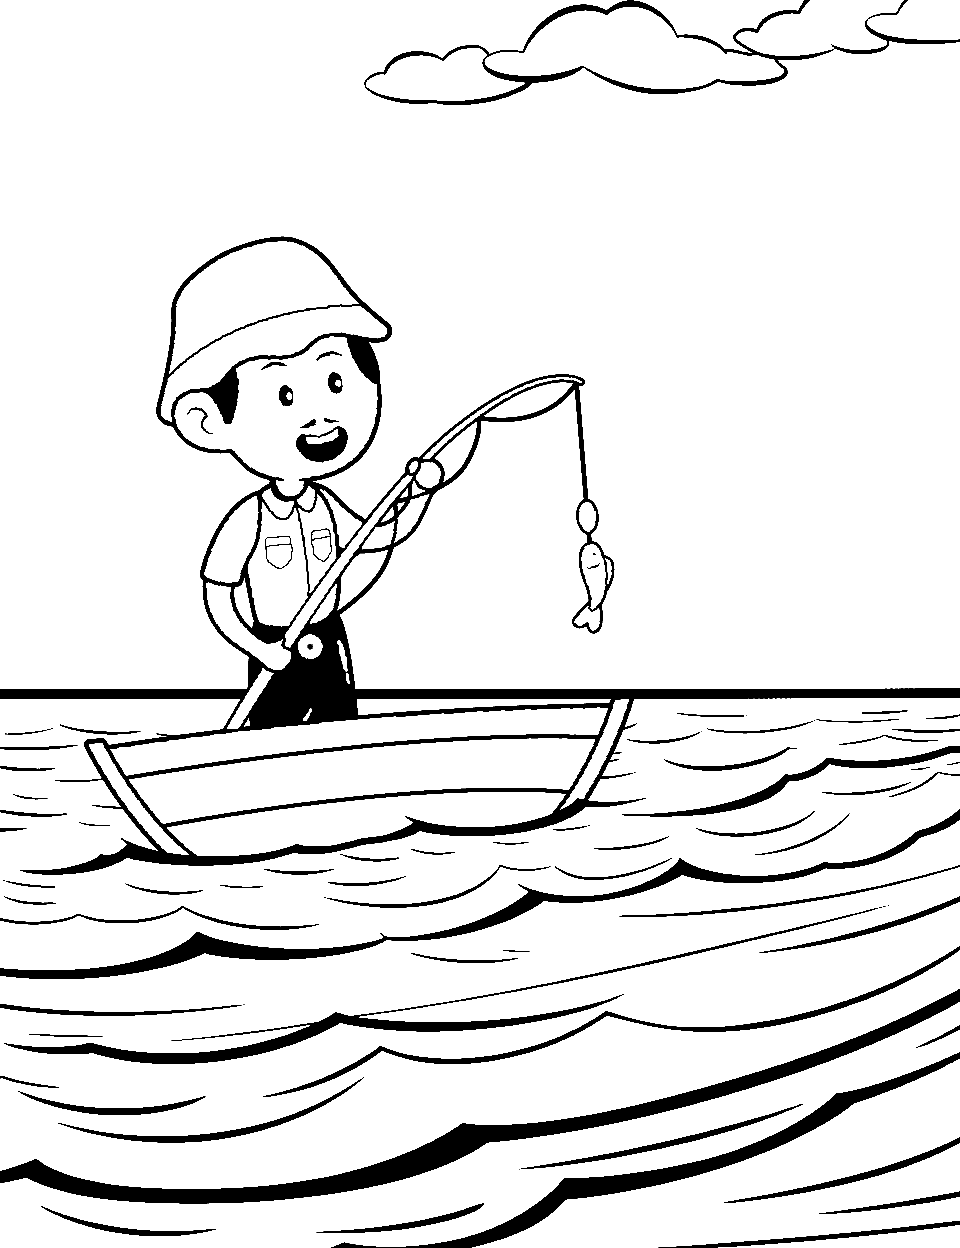 Fisherman in a Boat Ocean Coloring Page - A fisherman fishing in a small boat on a calm sea.